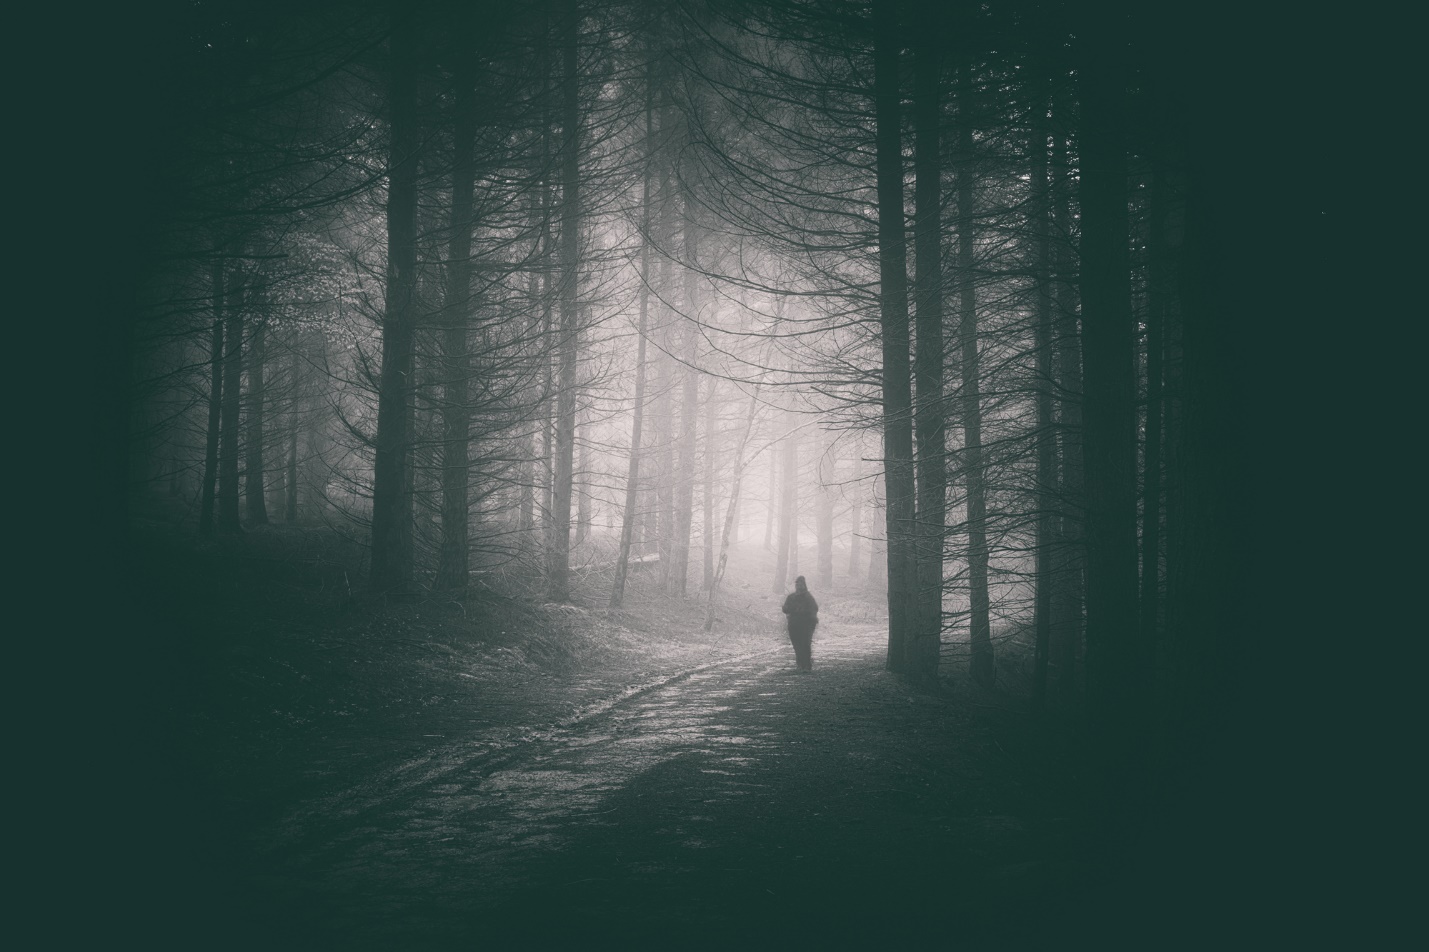 A person walking through a forest

Description automatically generated with low confidence